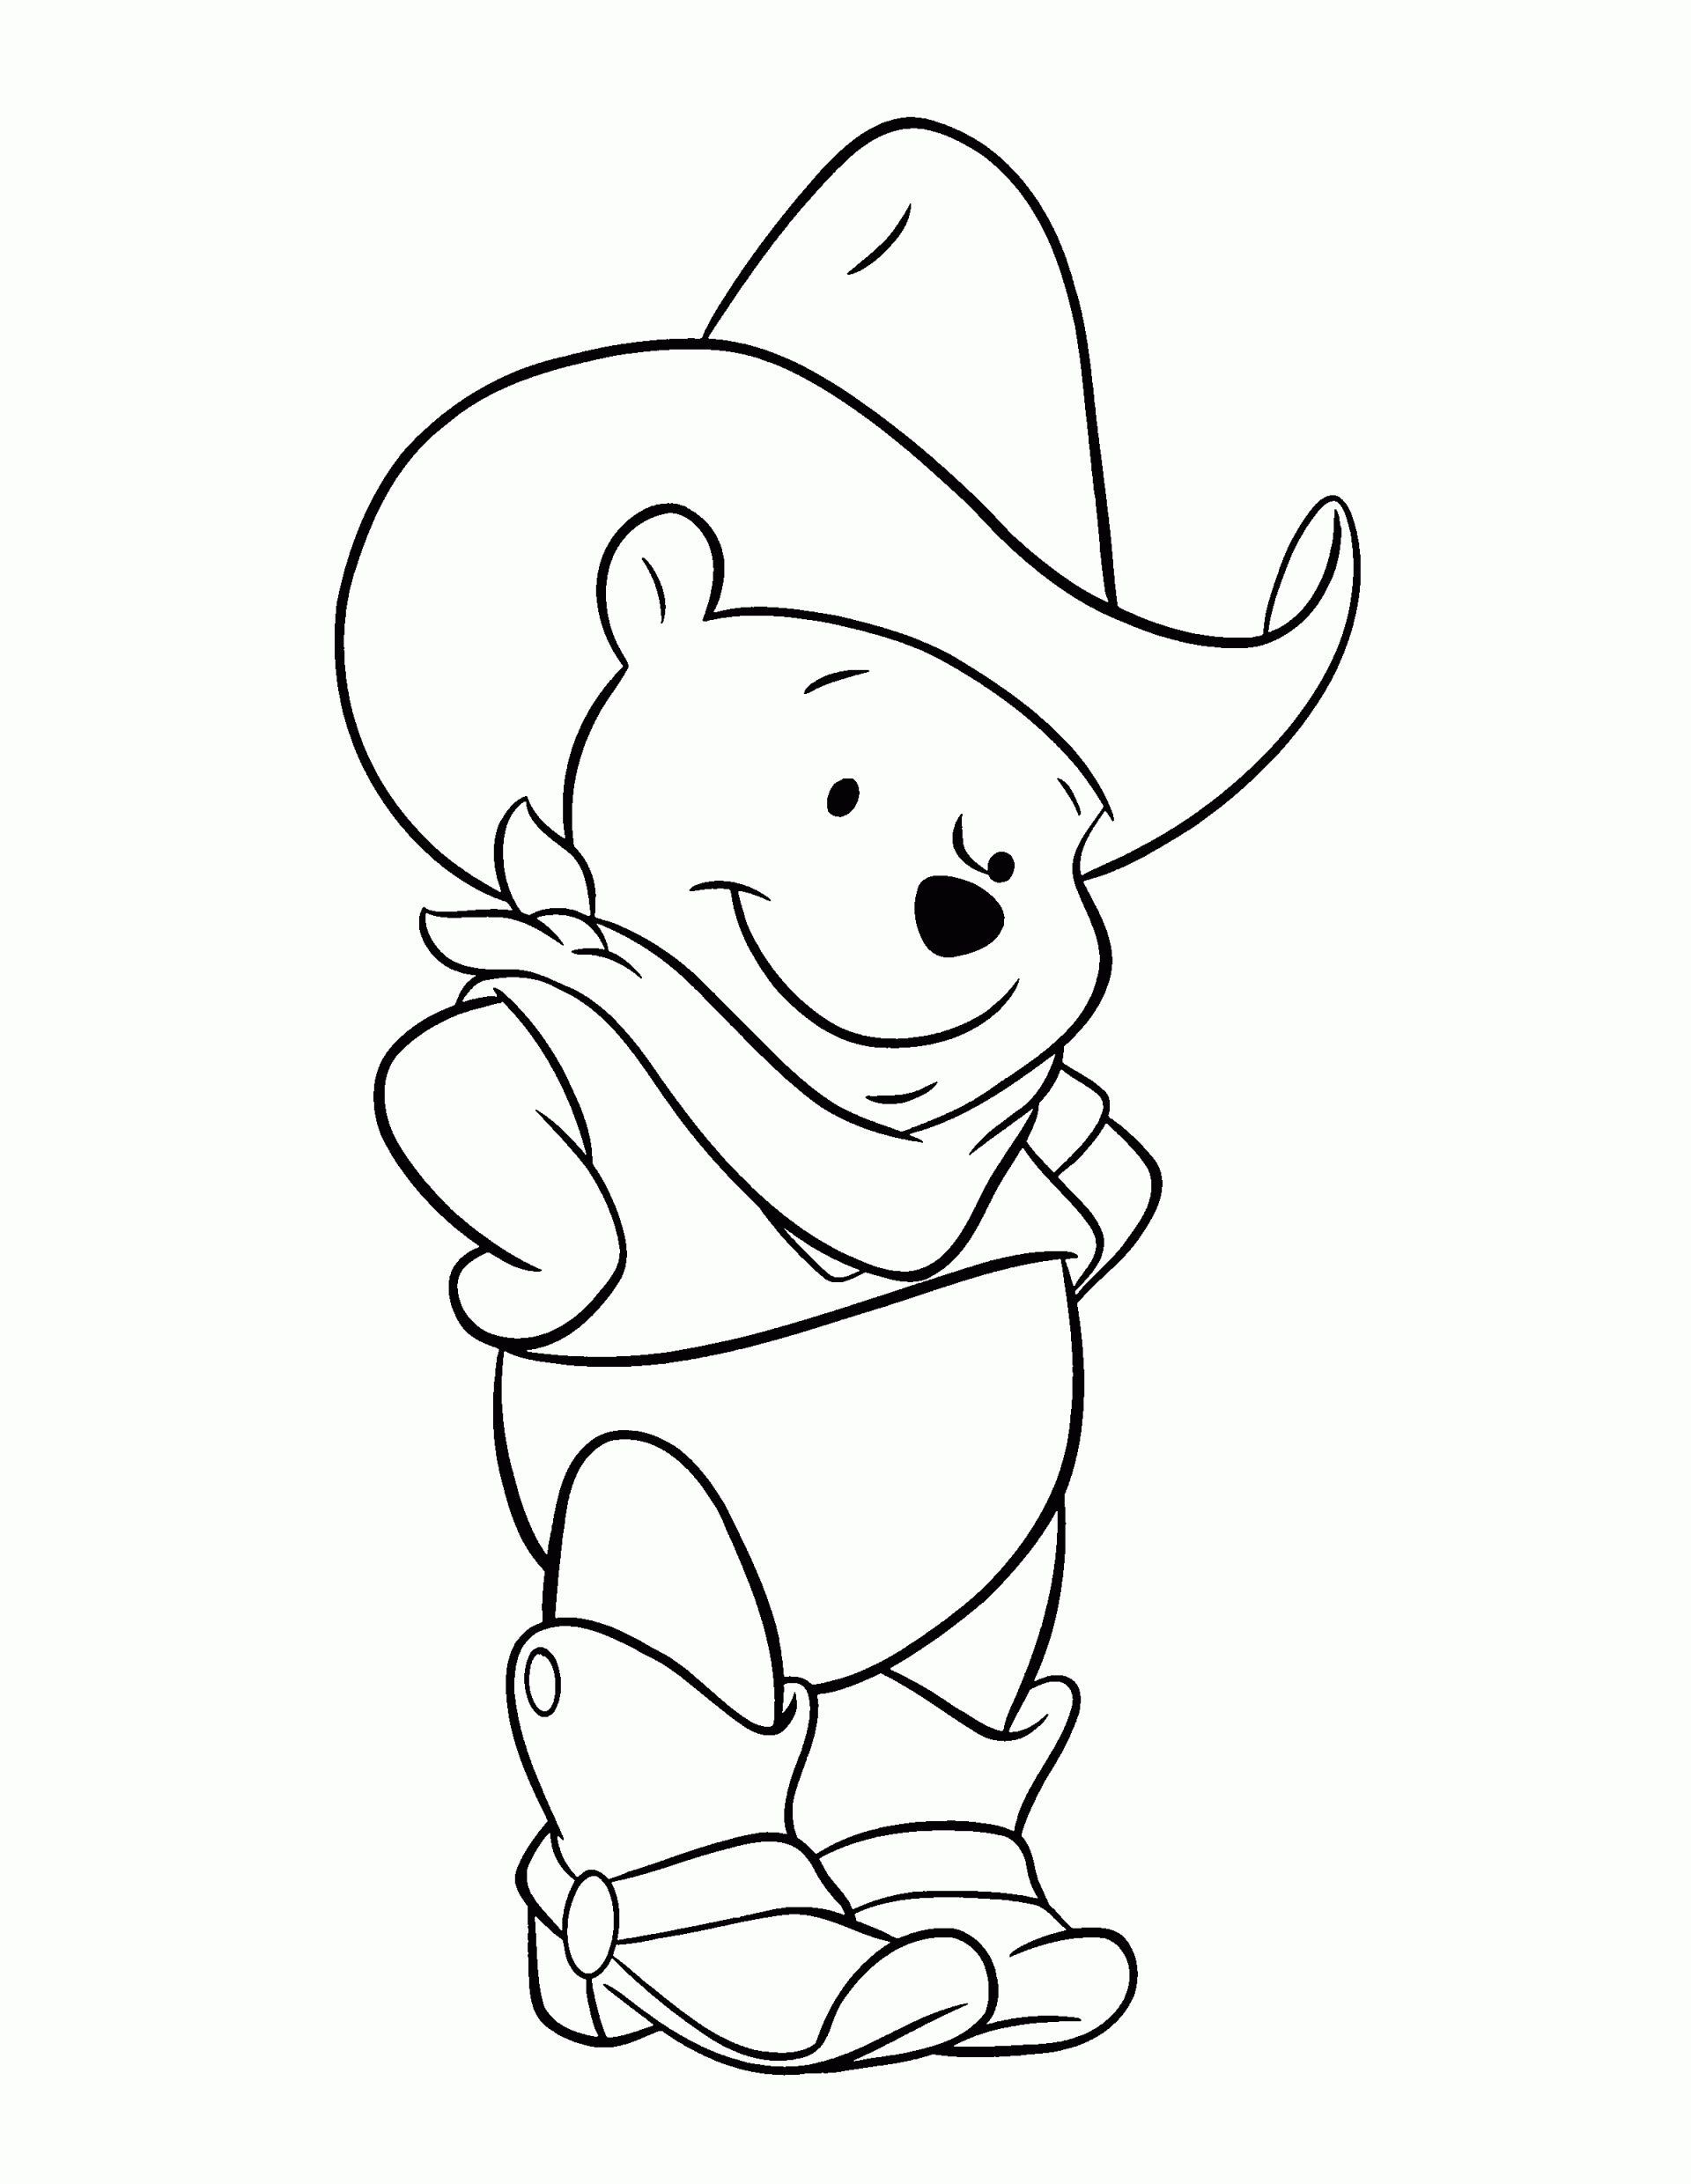 Free Cute Cartoon Characters Coloring Pages, Download Free Cute Cartoon